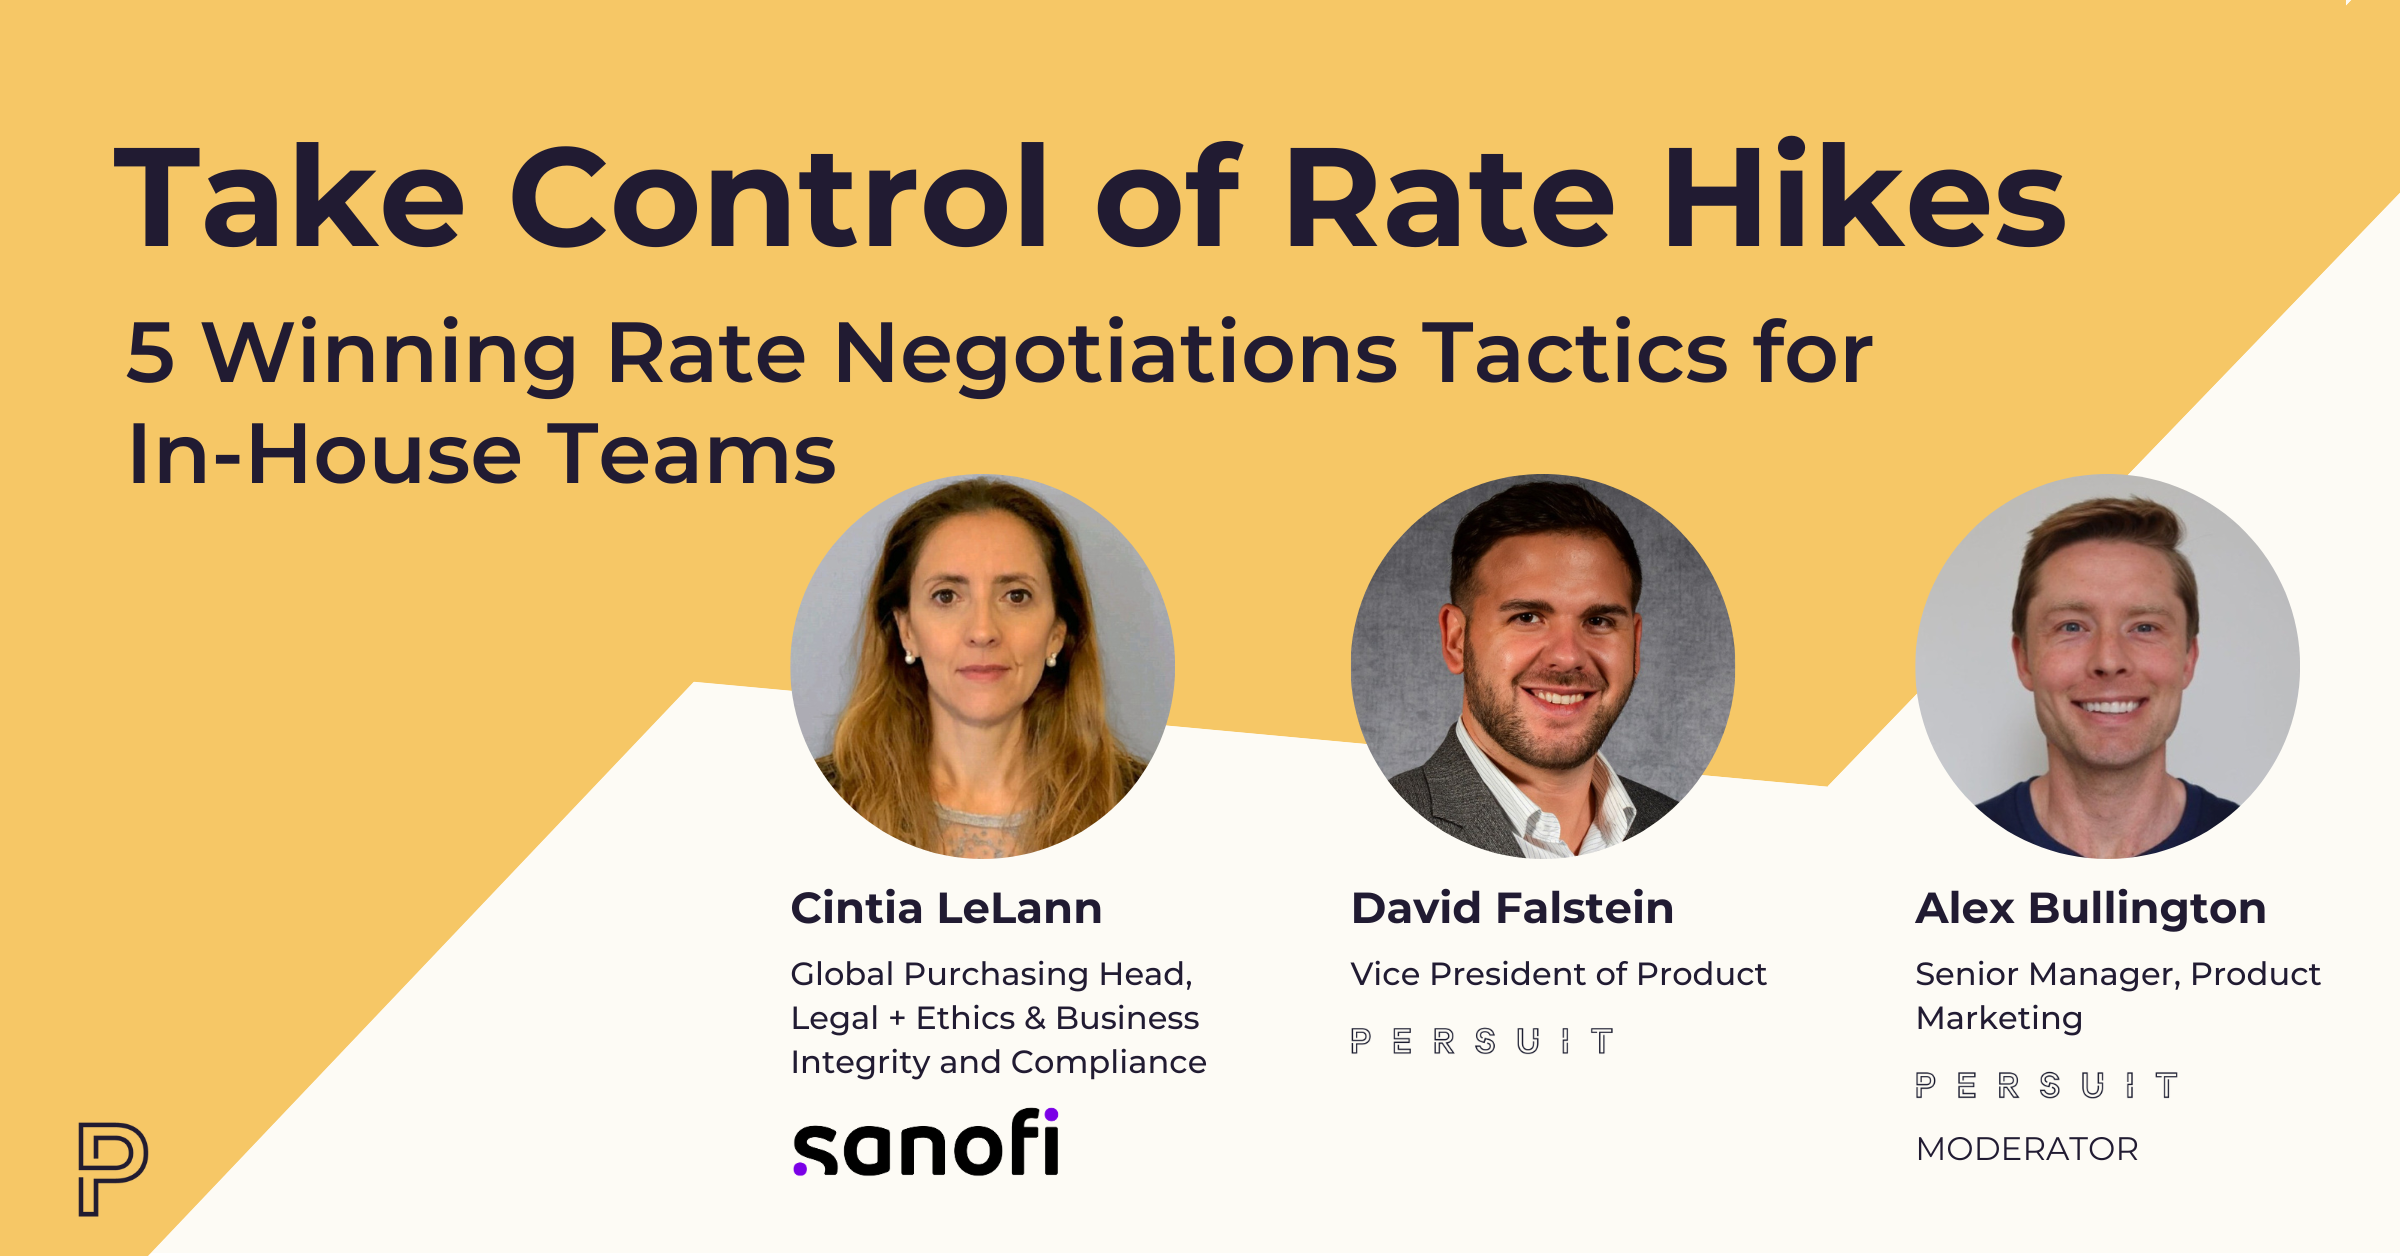 Rate Negotiations: 5 Winning Tactics for In-House Teams